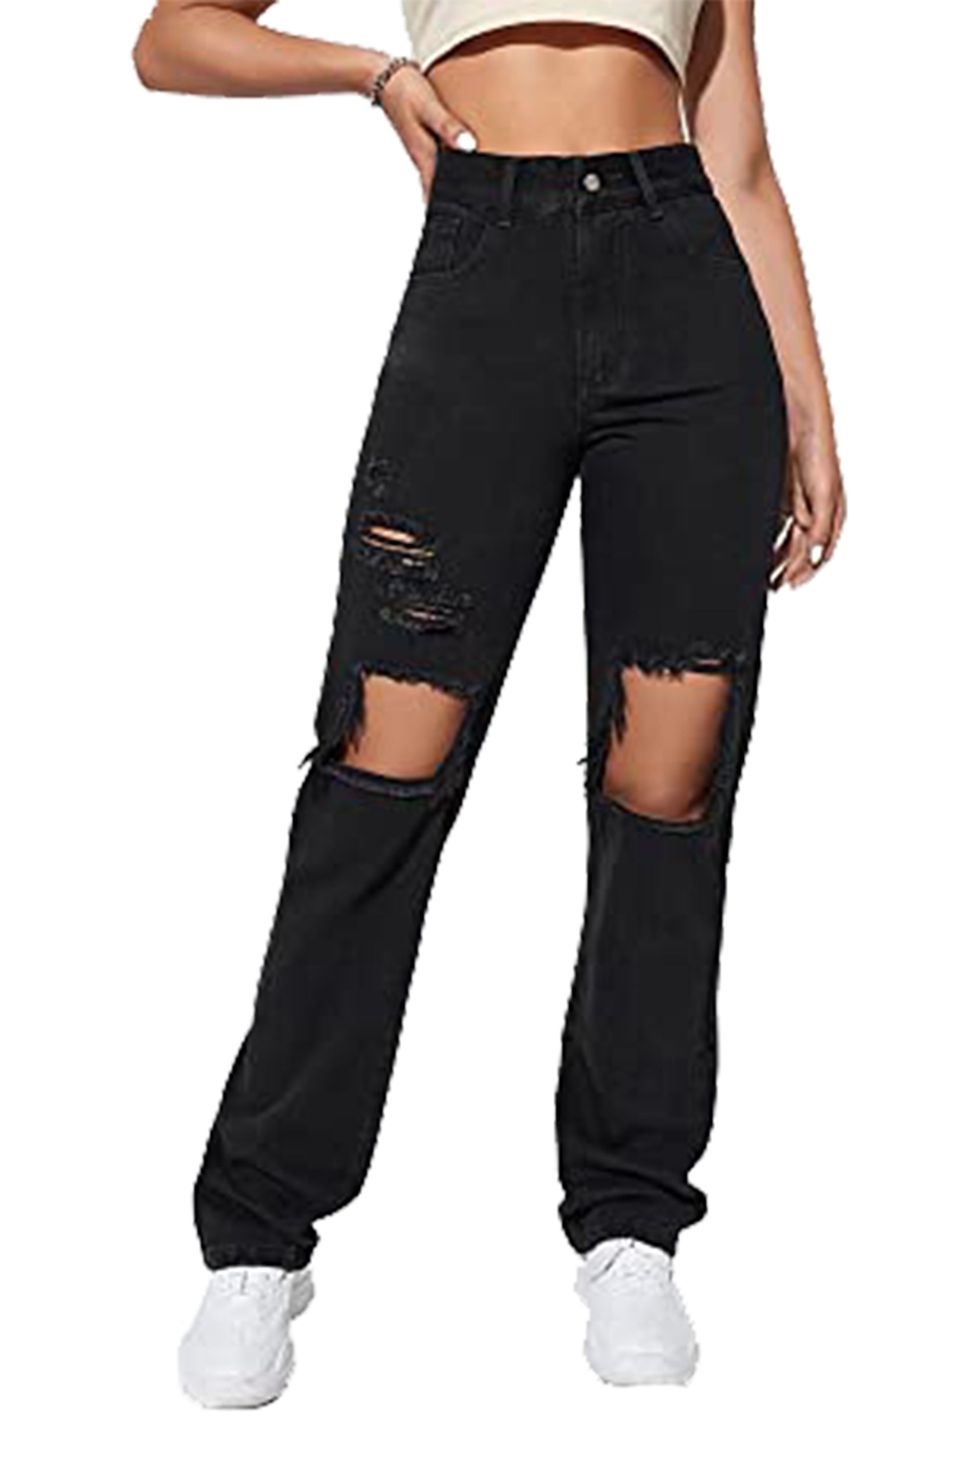 SweatyRocks Women's Straight Wide Leg High Waisted Jeans Ripped Distressed  Cut Out Denim Pants